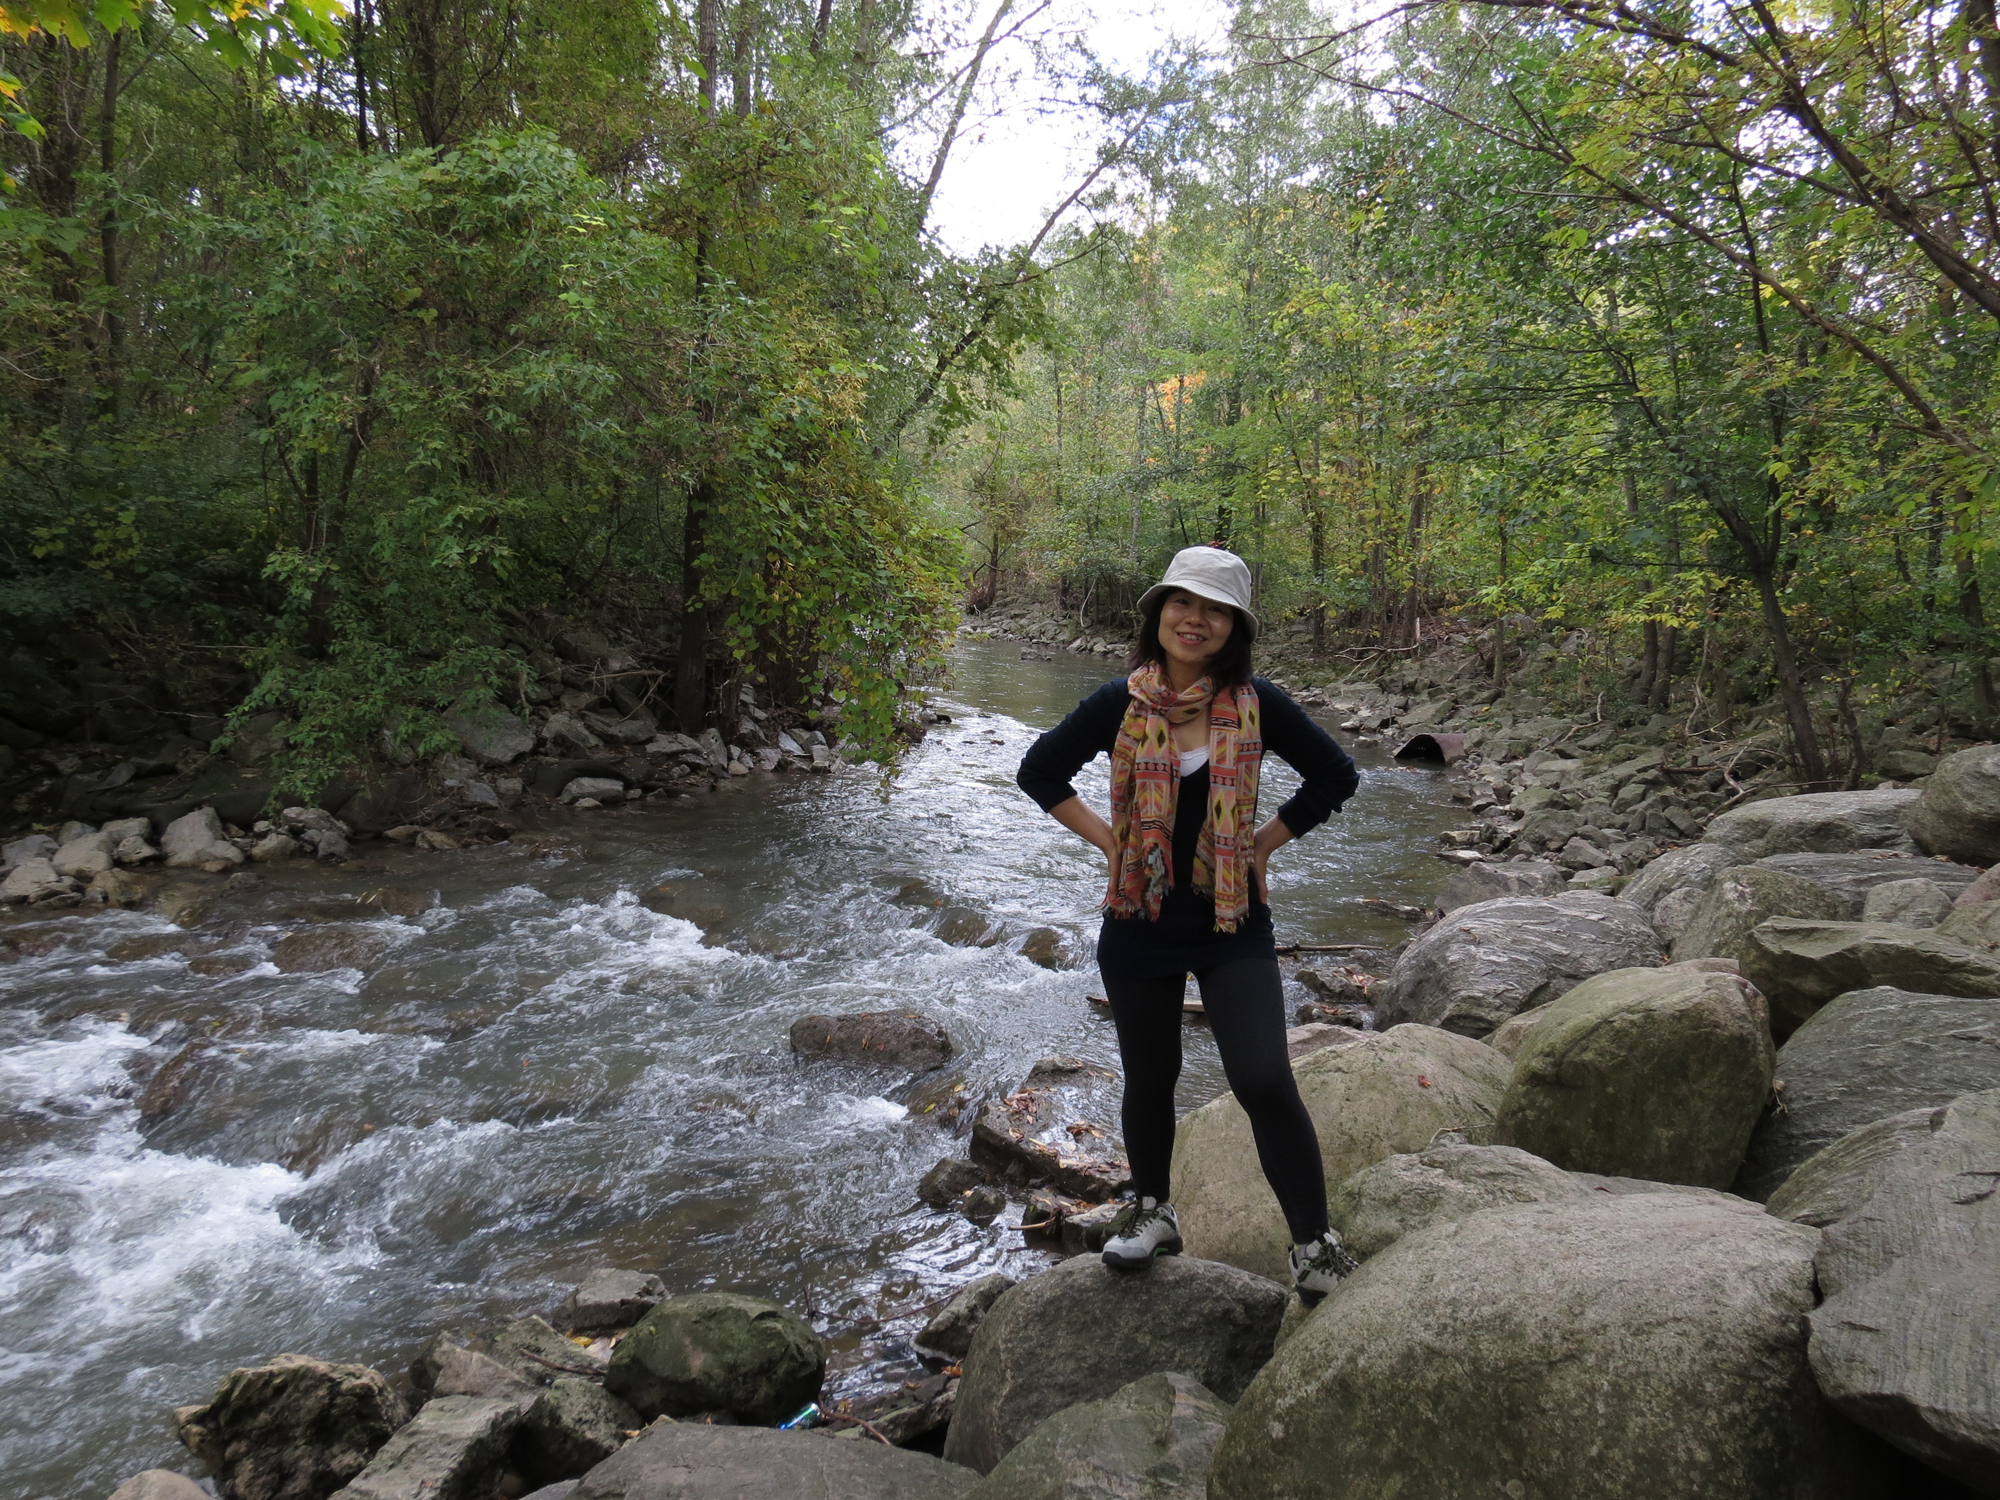 a woman stands in a rocky area by a river